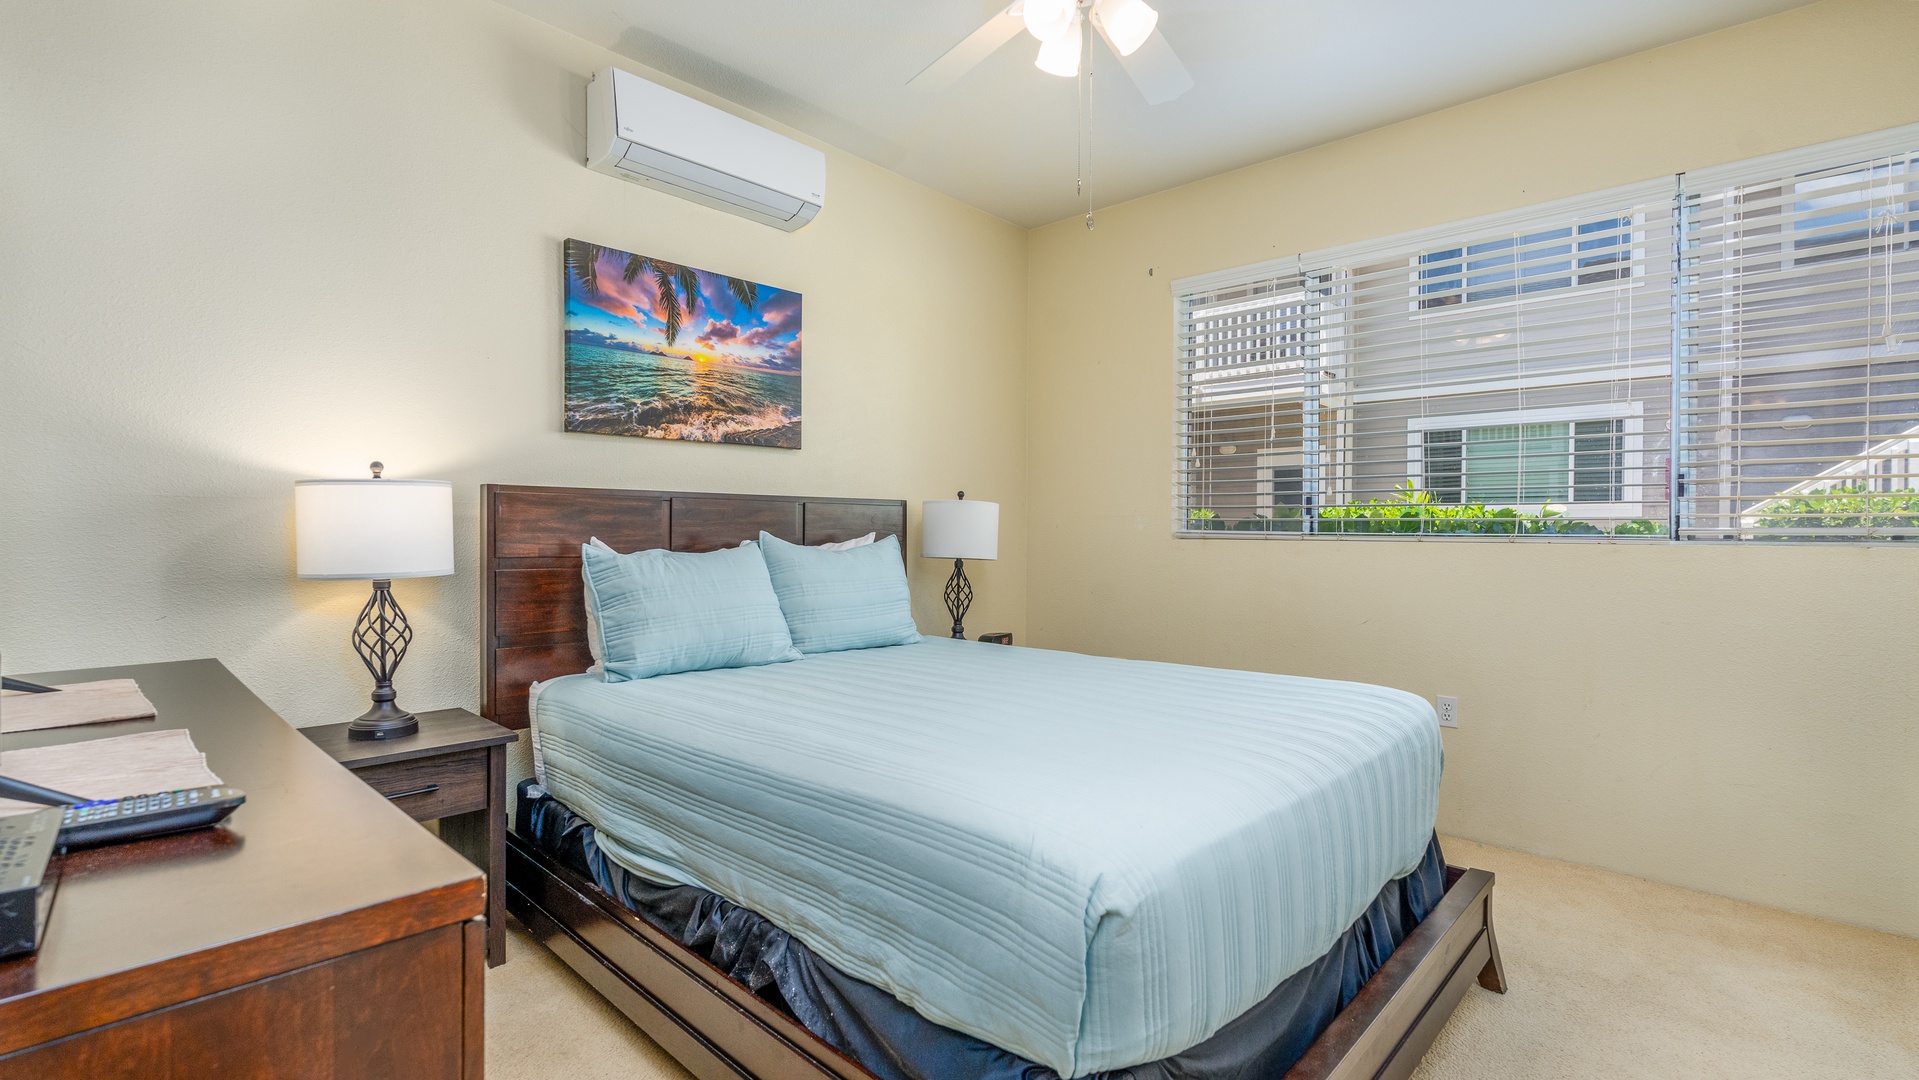 Kapolei Vacation Rentals, Fairways at Ko Olina 18C - The second guest bedroom has split AC and natural lighting.